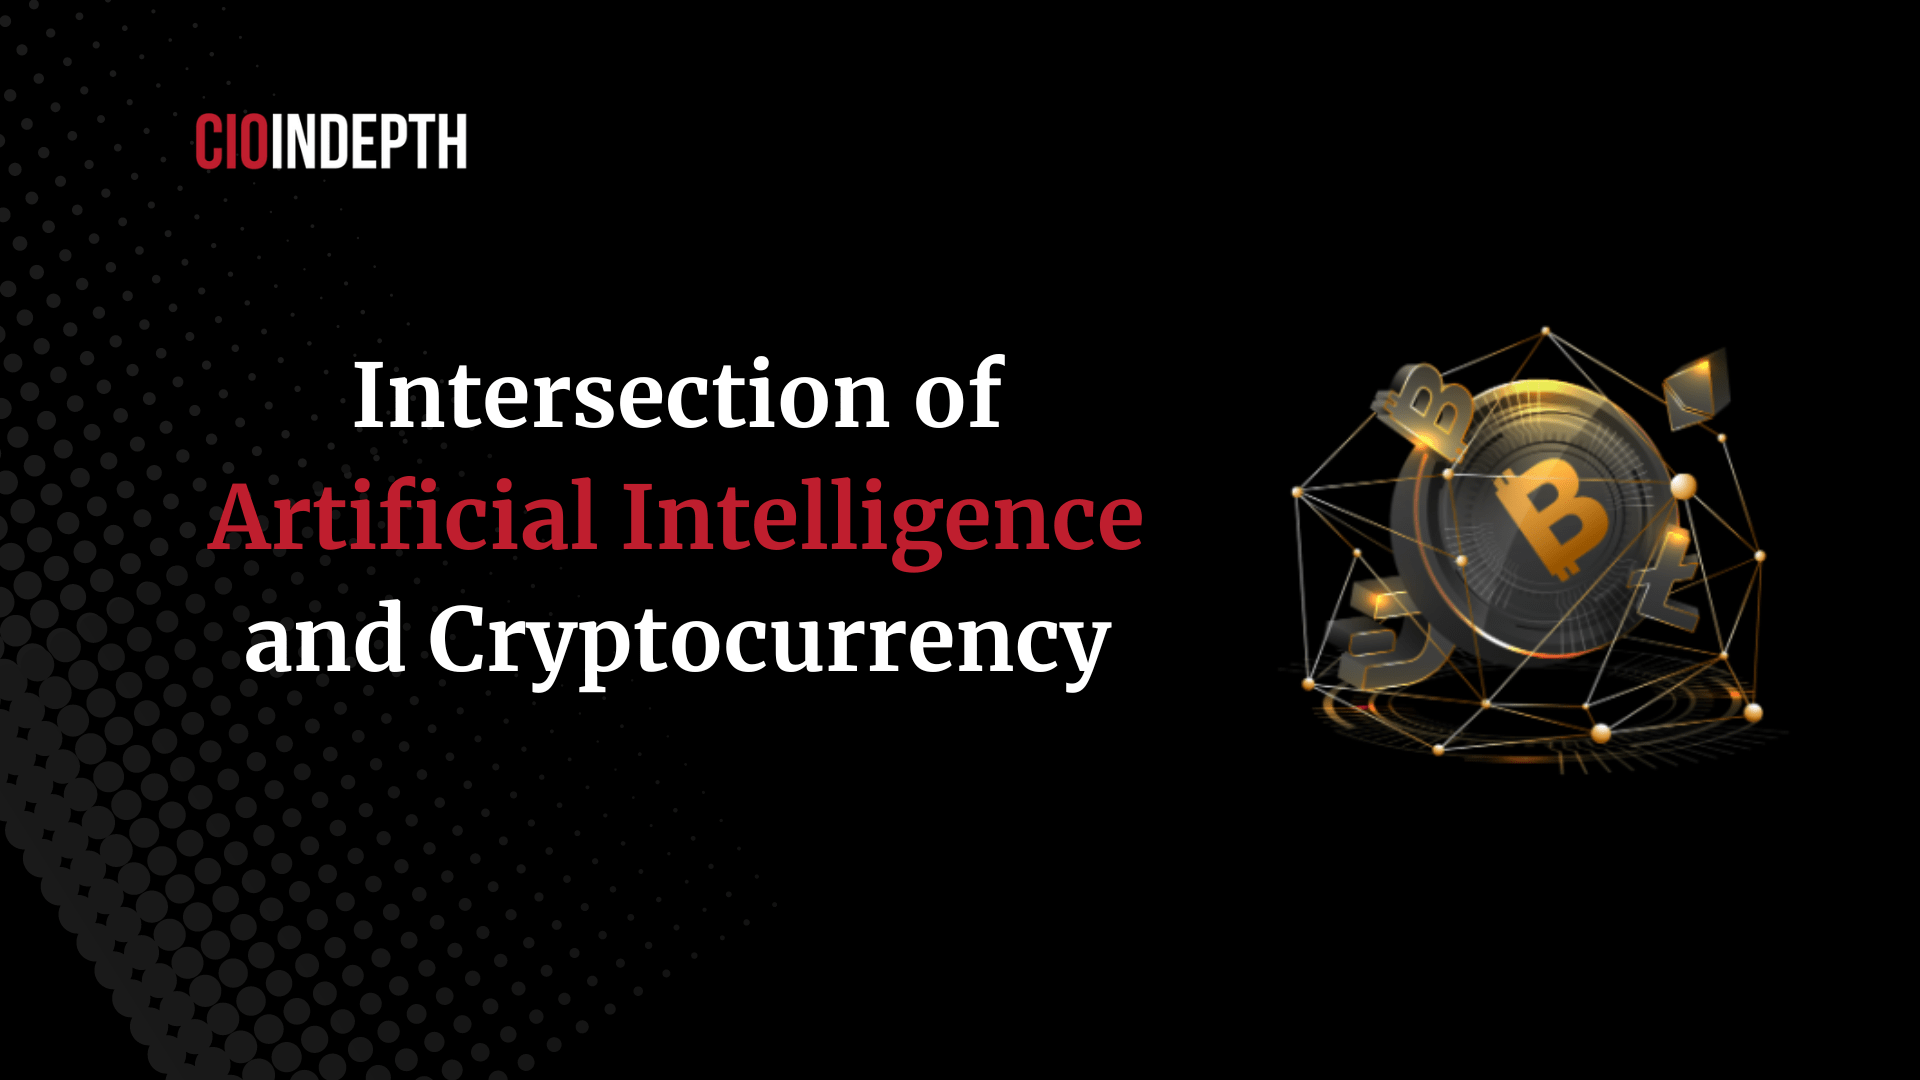 Understanding the intersection of artificial intelligence and cryptocurrency